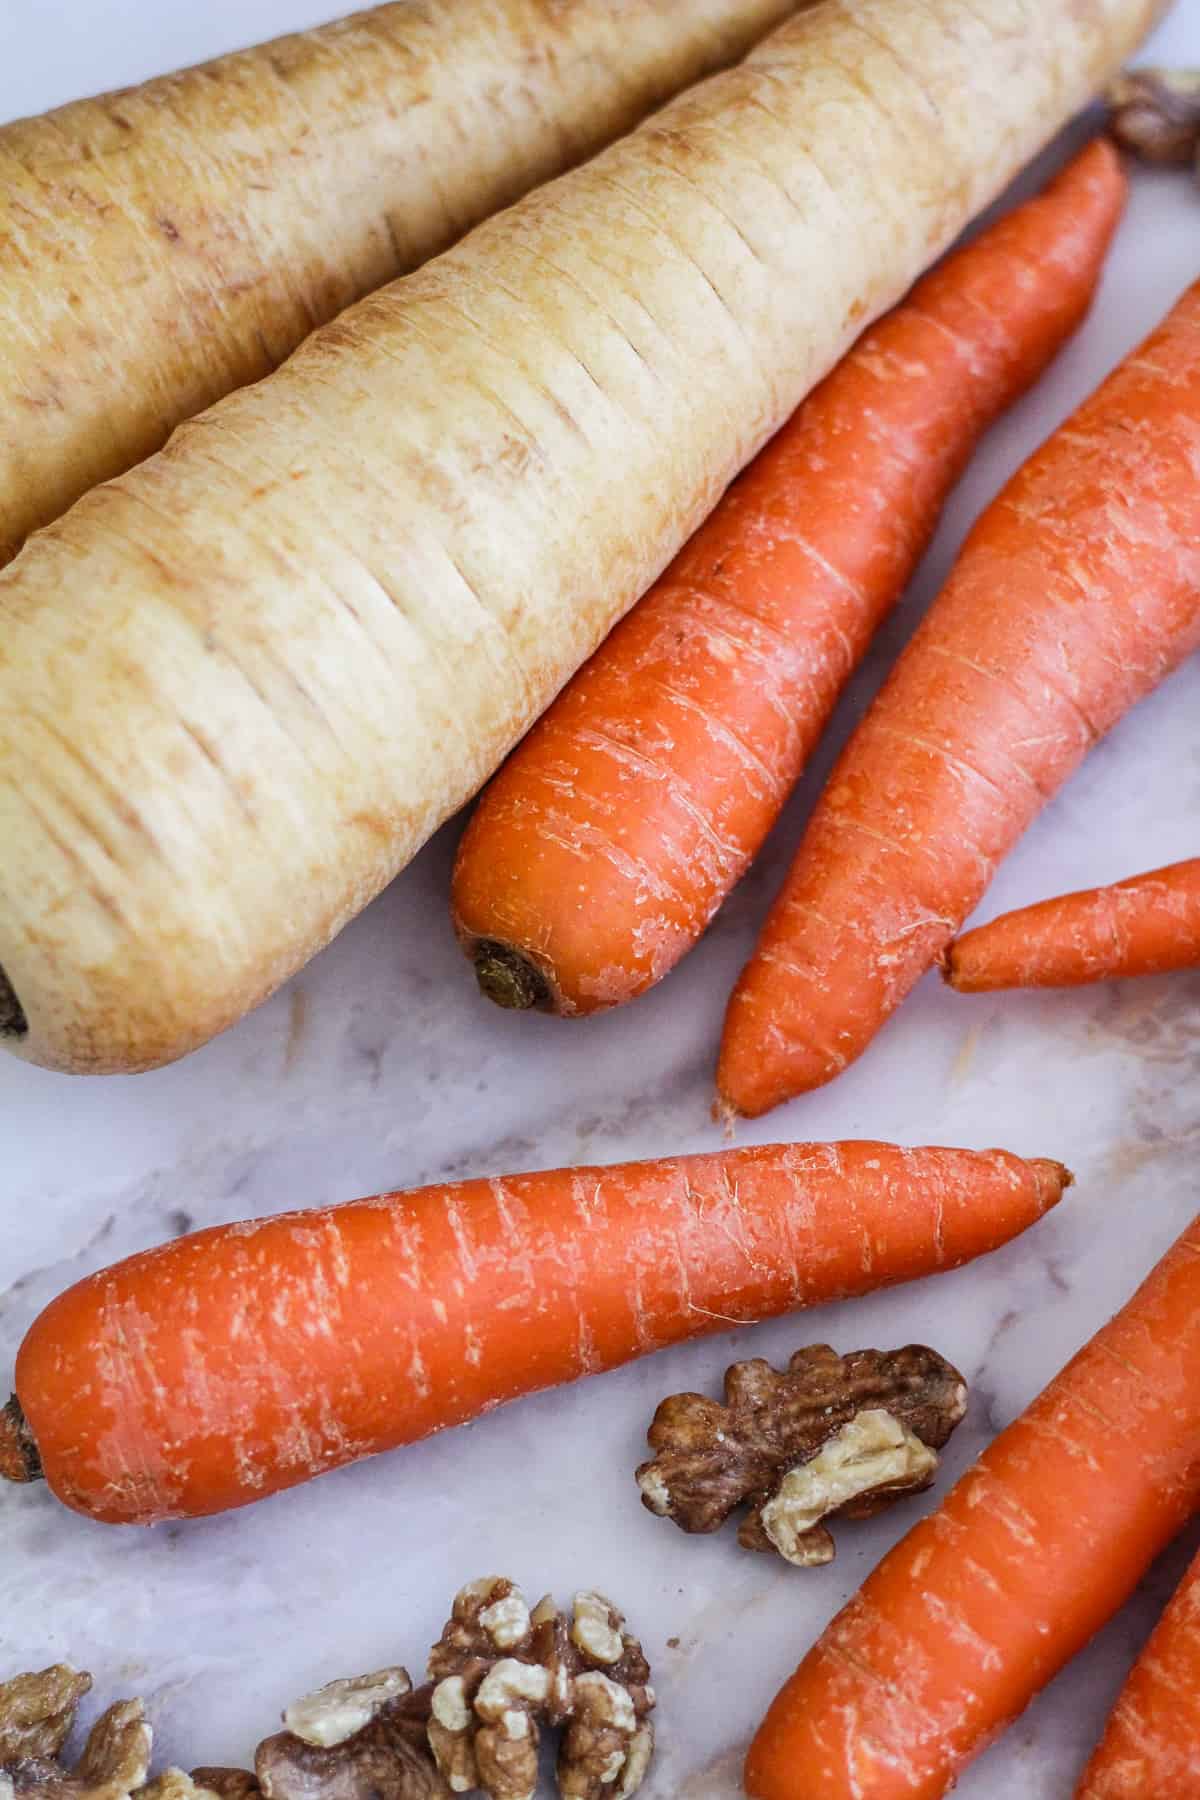 Whole parsnips, whole carrots, and walnuts on white marble.